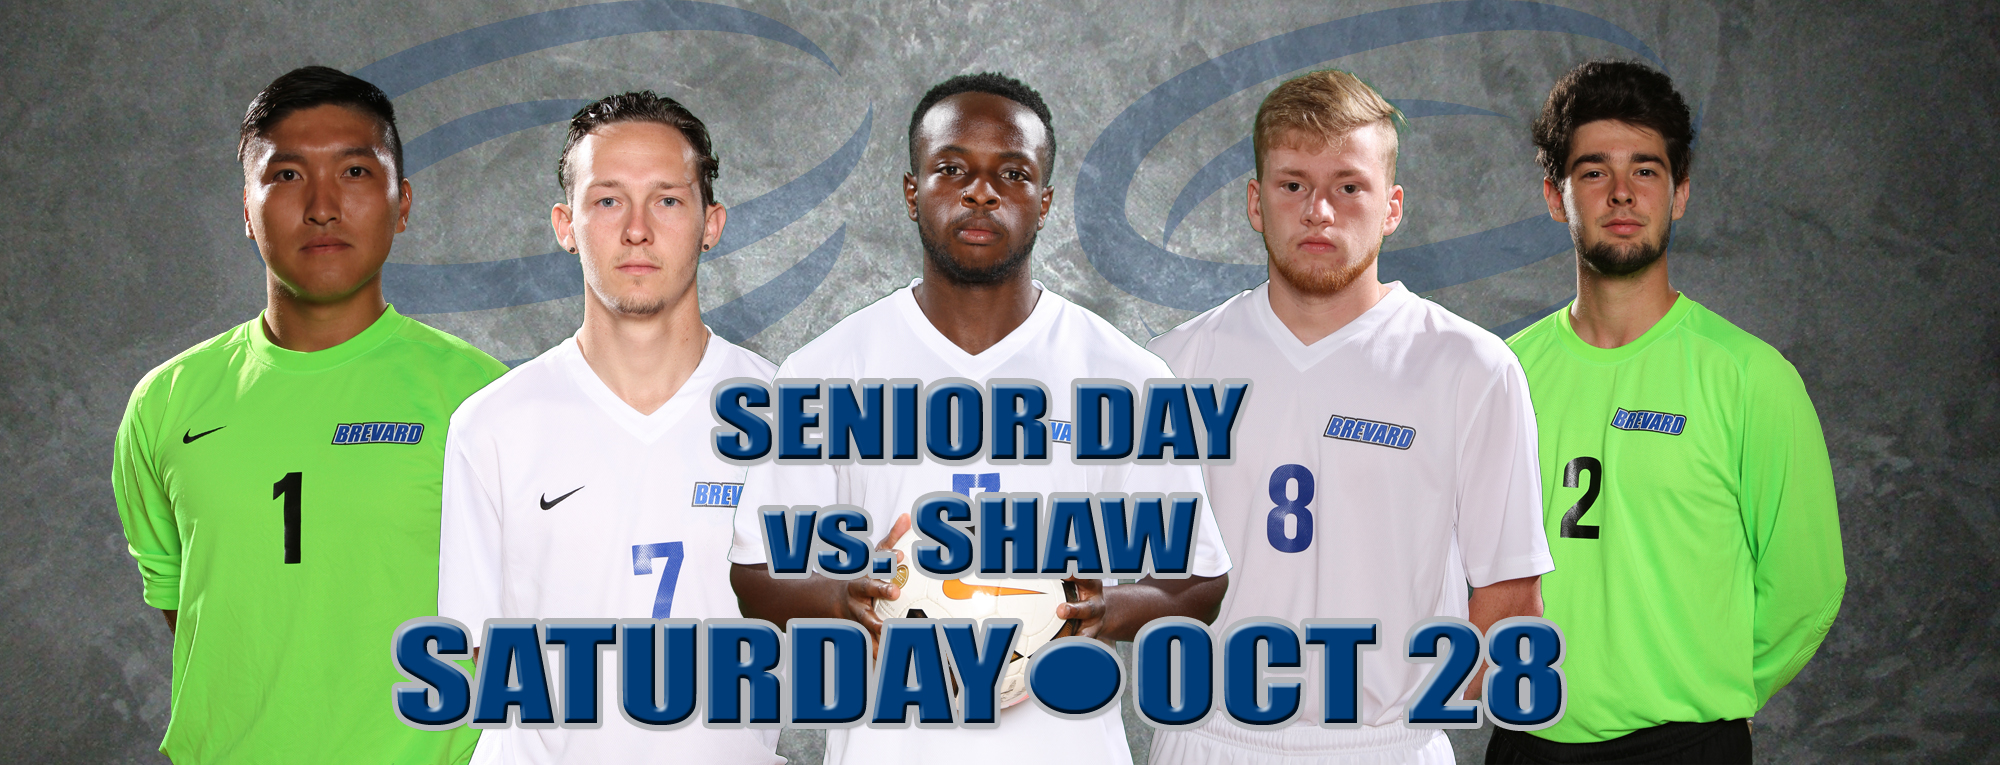 Brevard takes on Shaw in final match of the season